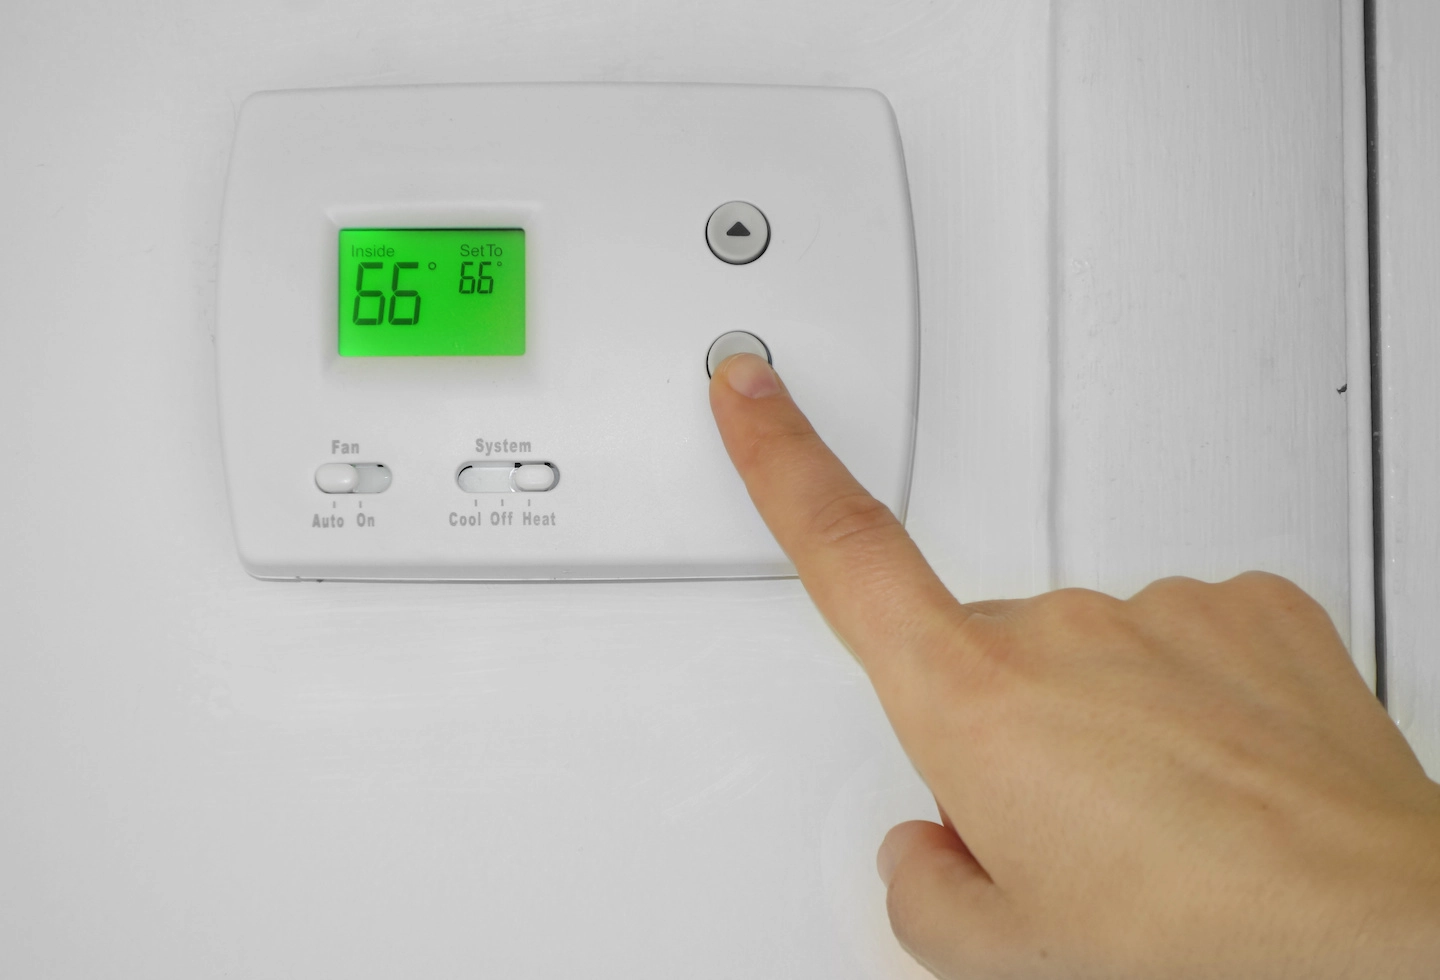 Person setting thermostat to heat and lowering the temperature.